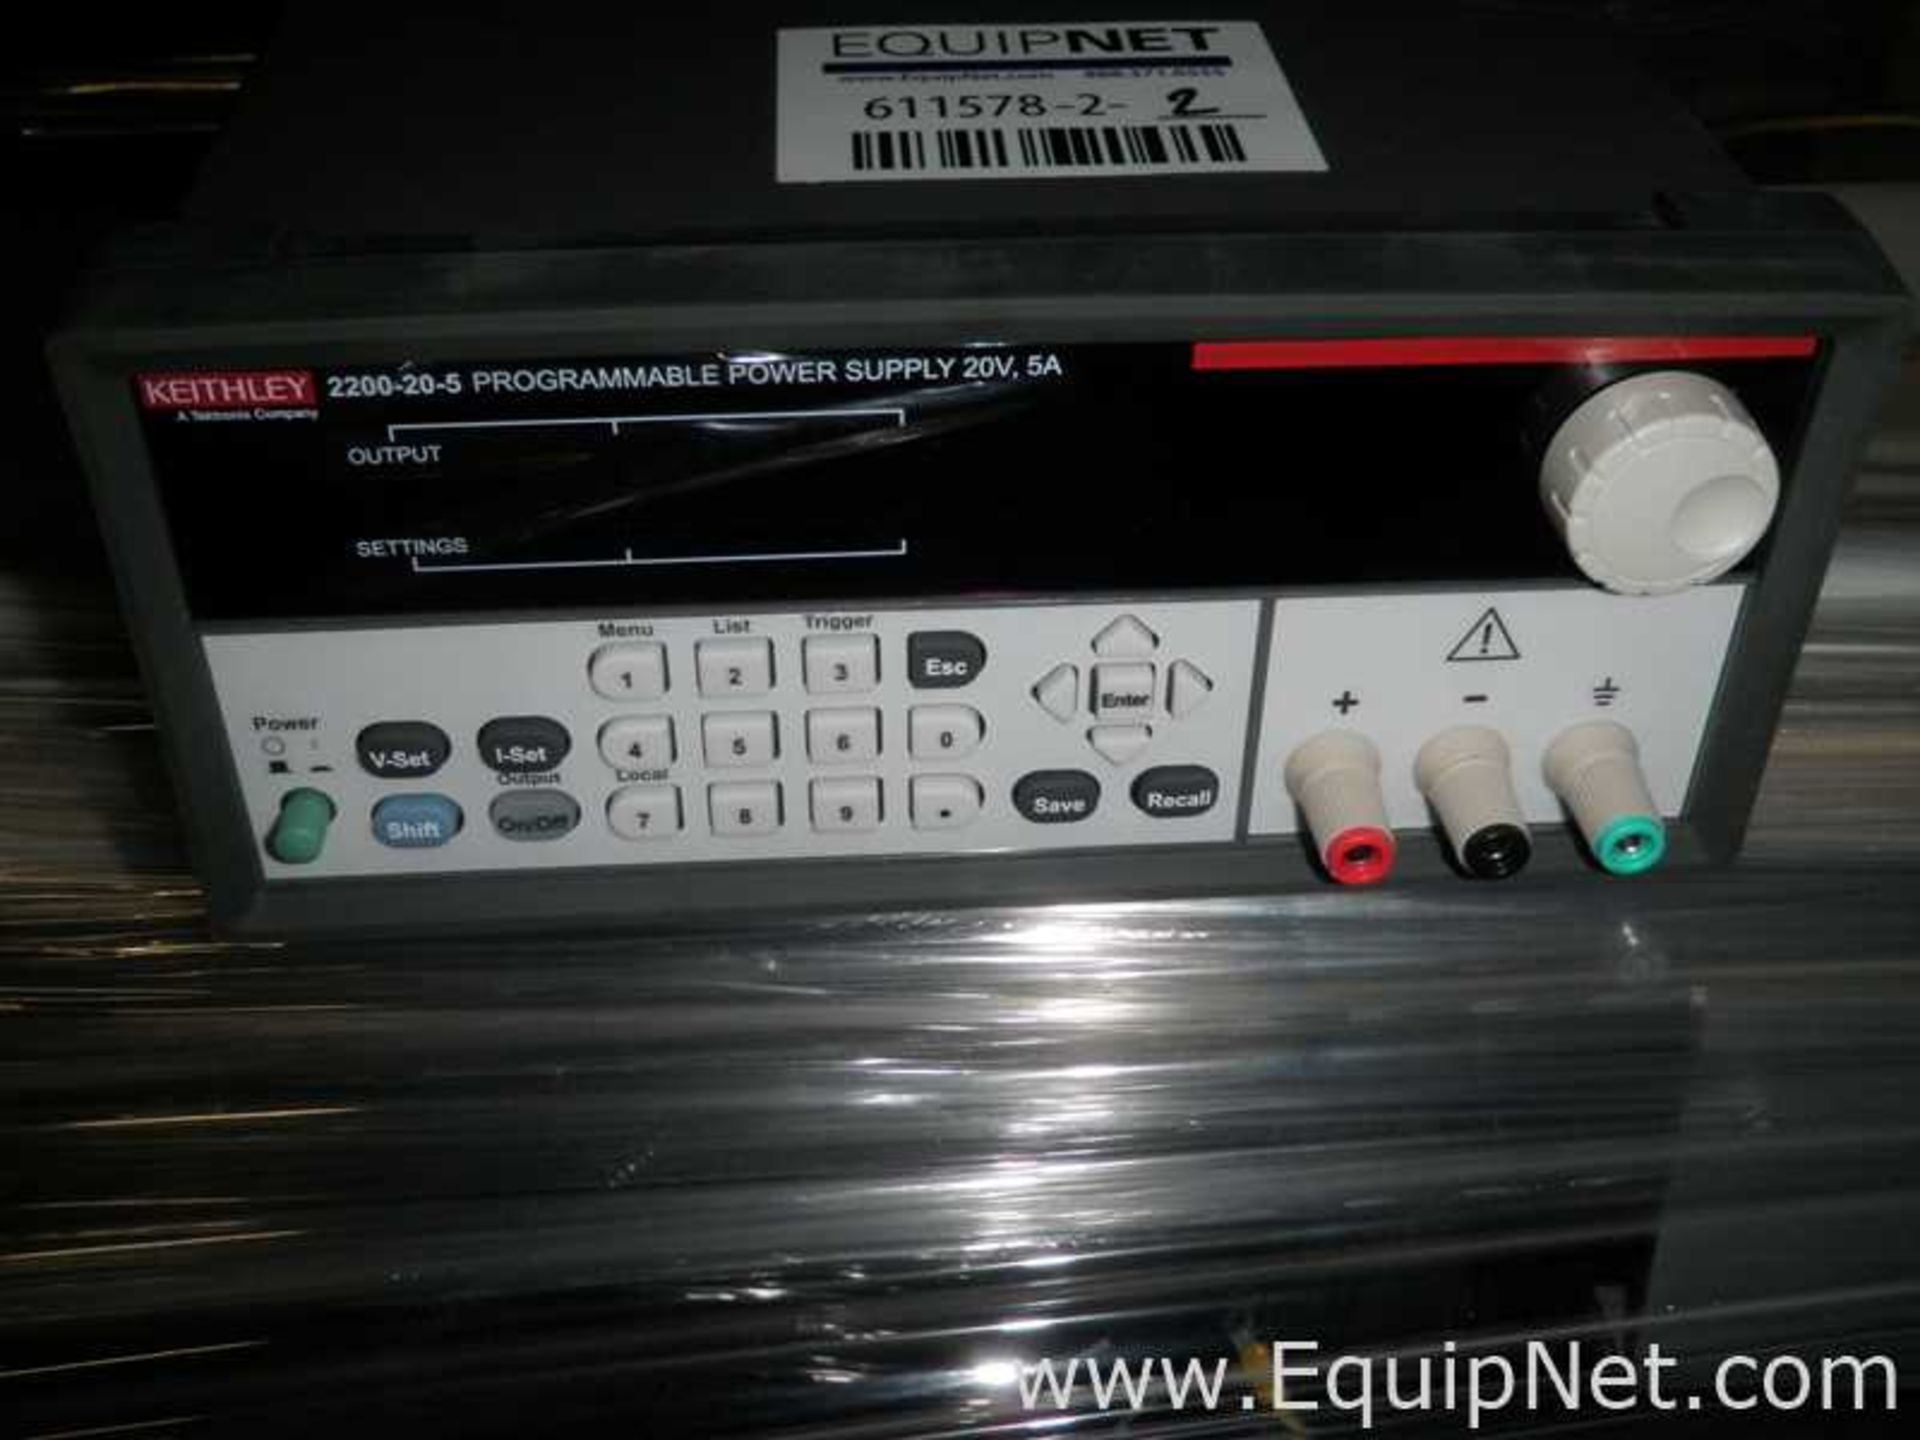 Lot of 2 off Keithley 2200 20 5 Power Source Analyzers - Image 5 of 8